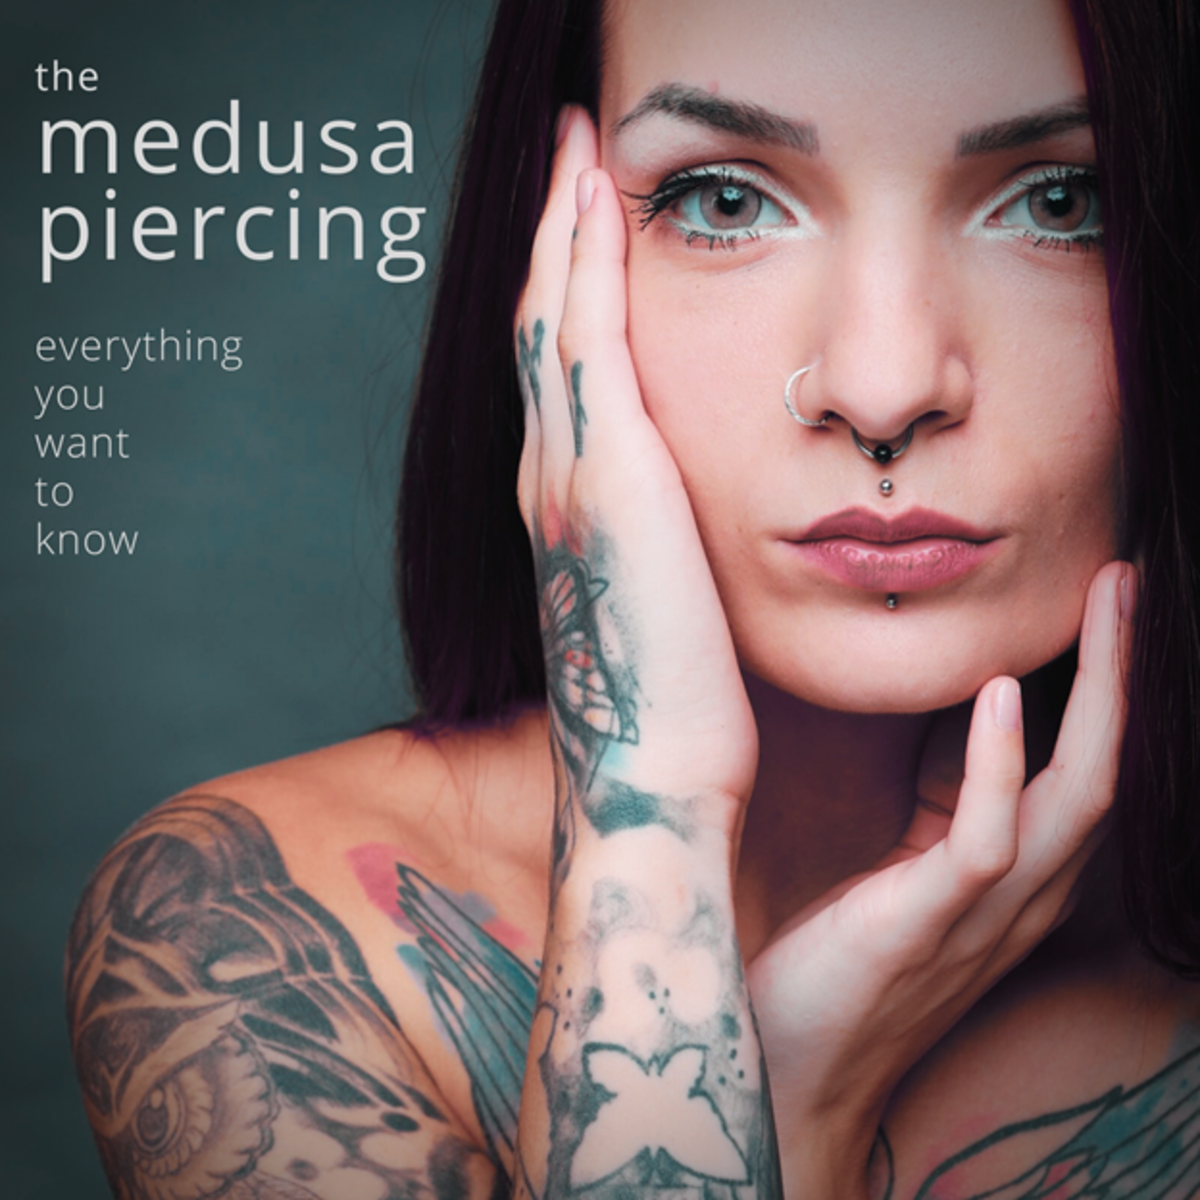 The Medusa Philtrum Piercing Guide: Everything You Want to Know